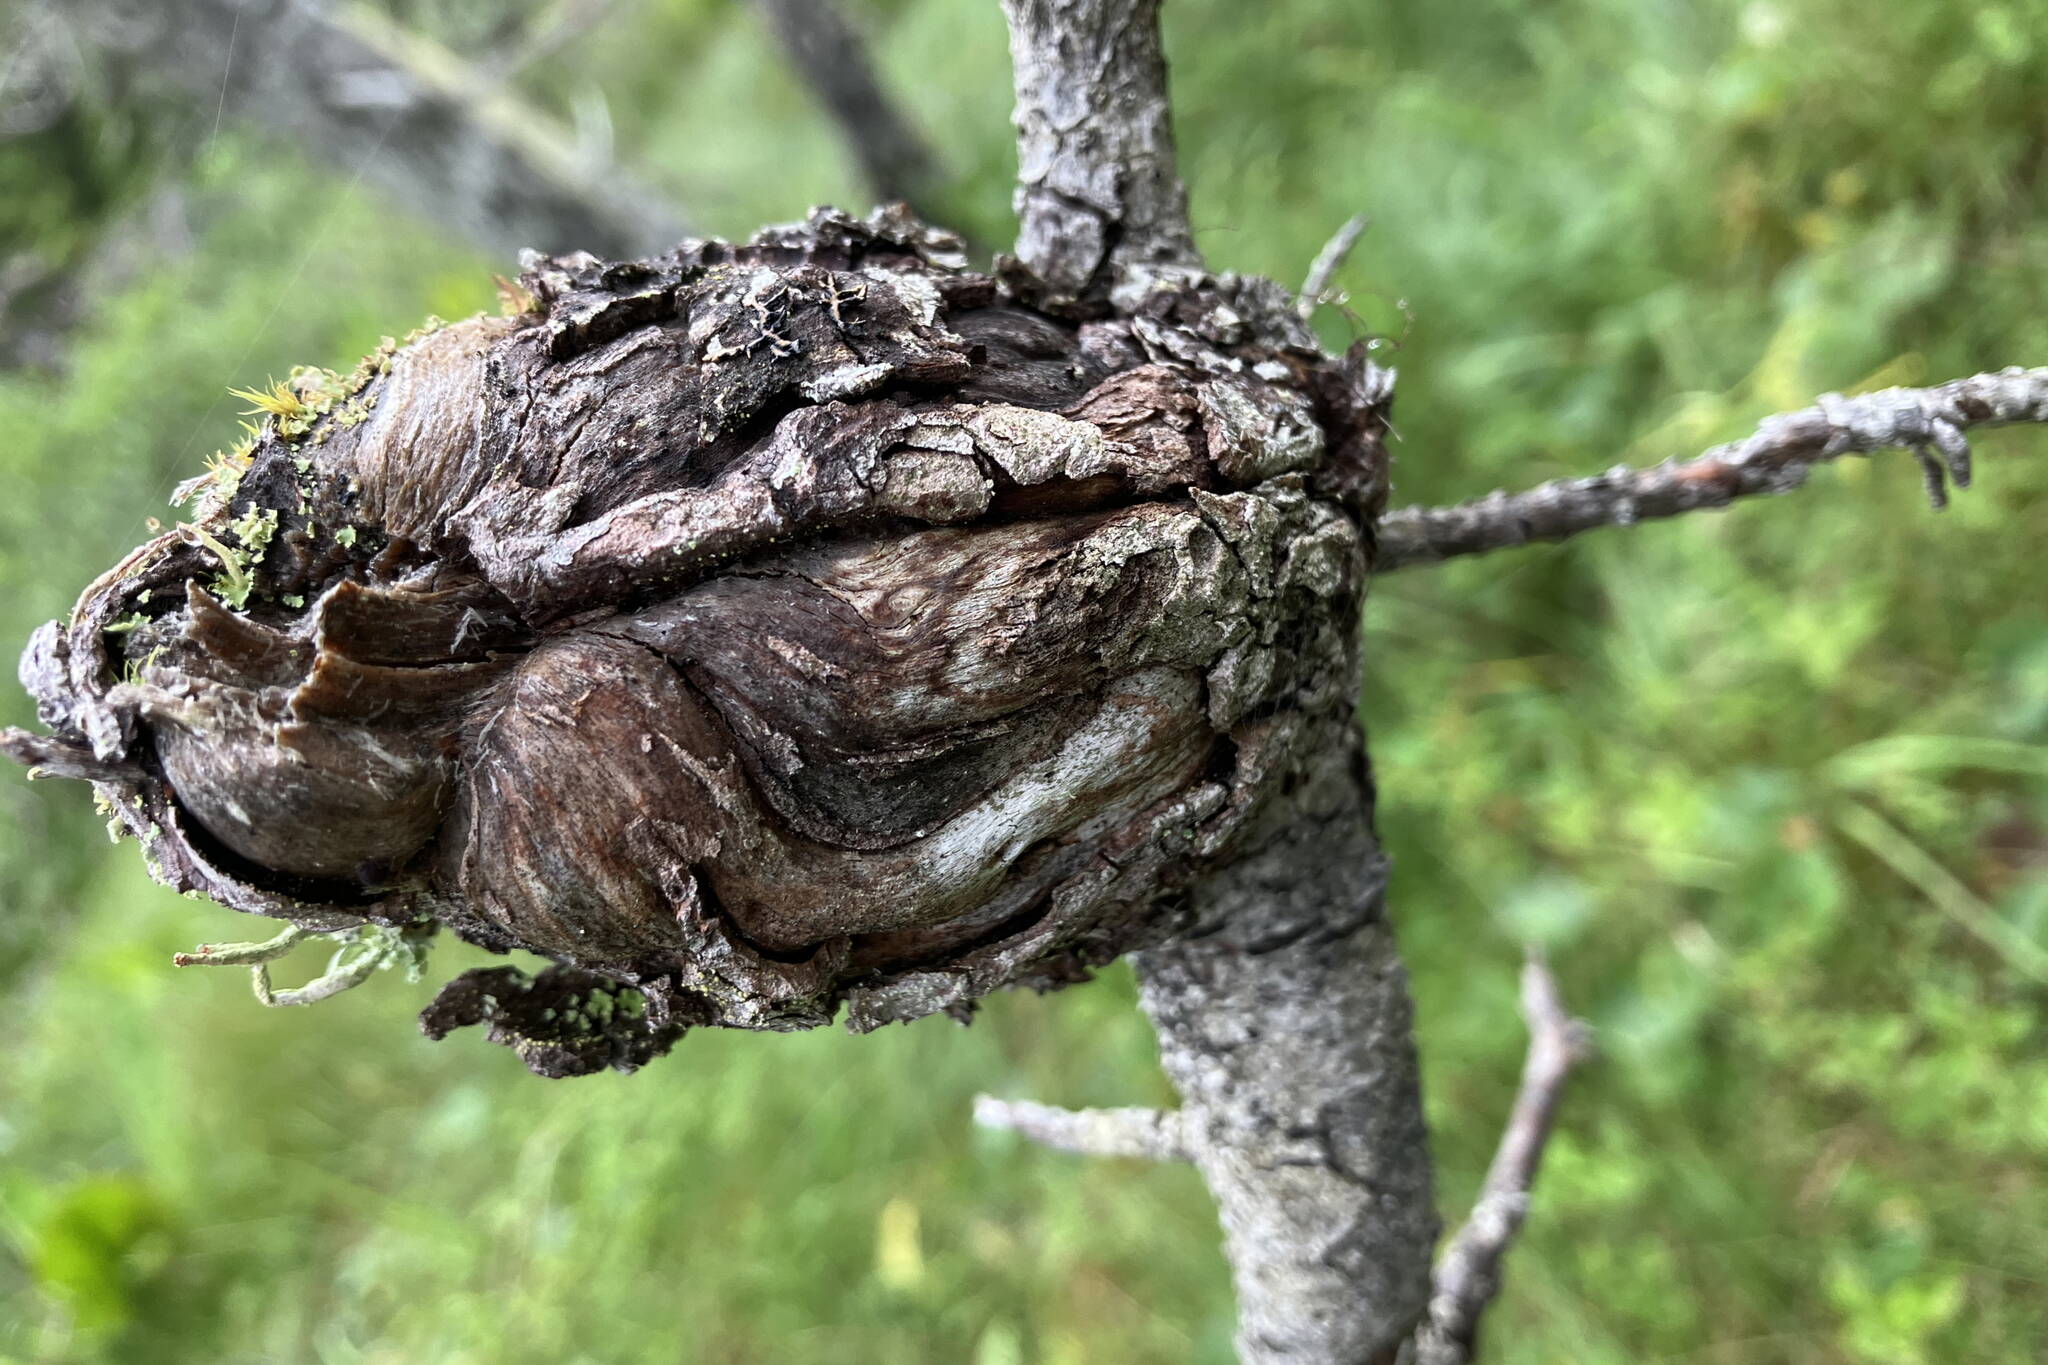 Western rust fungus can leave a big gnarly lump on pine branches. (Photo by Mary F. Willson)